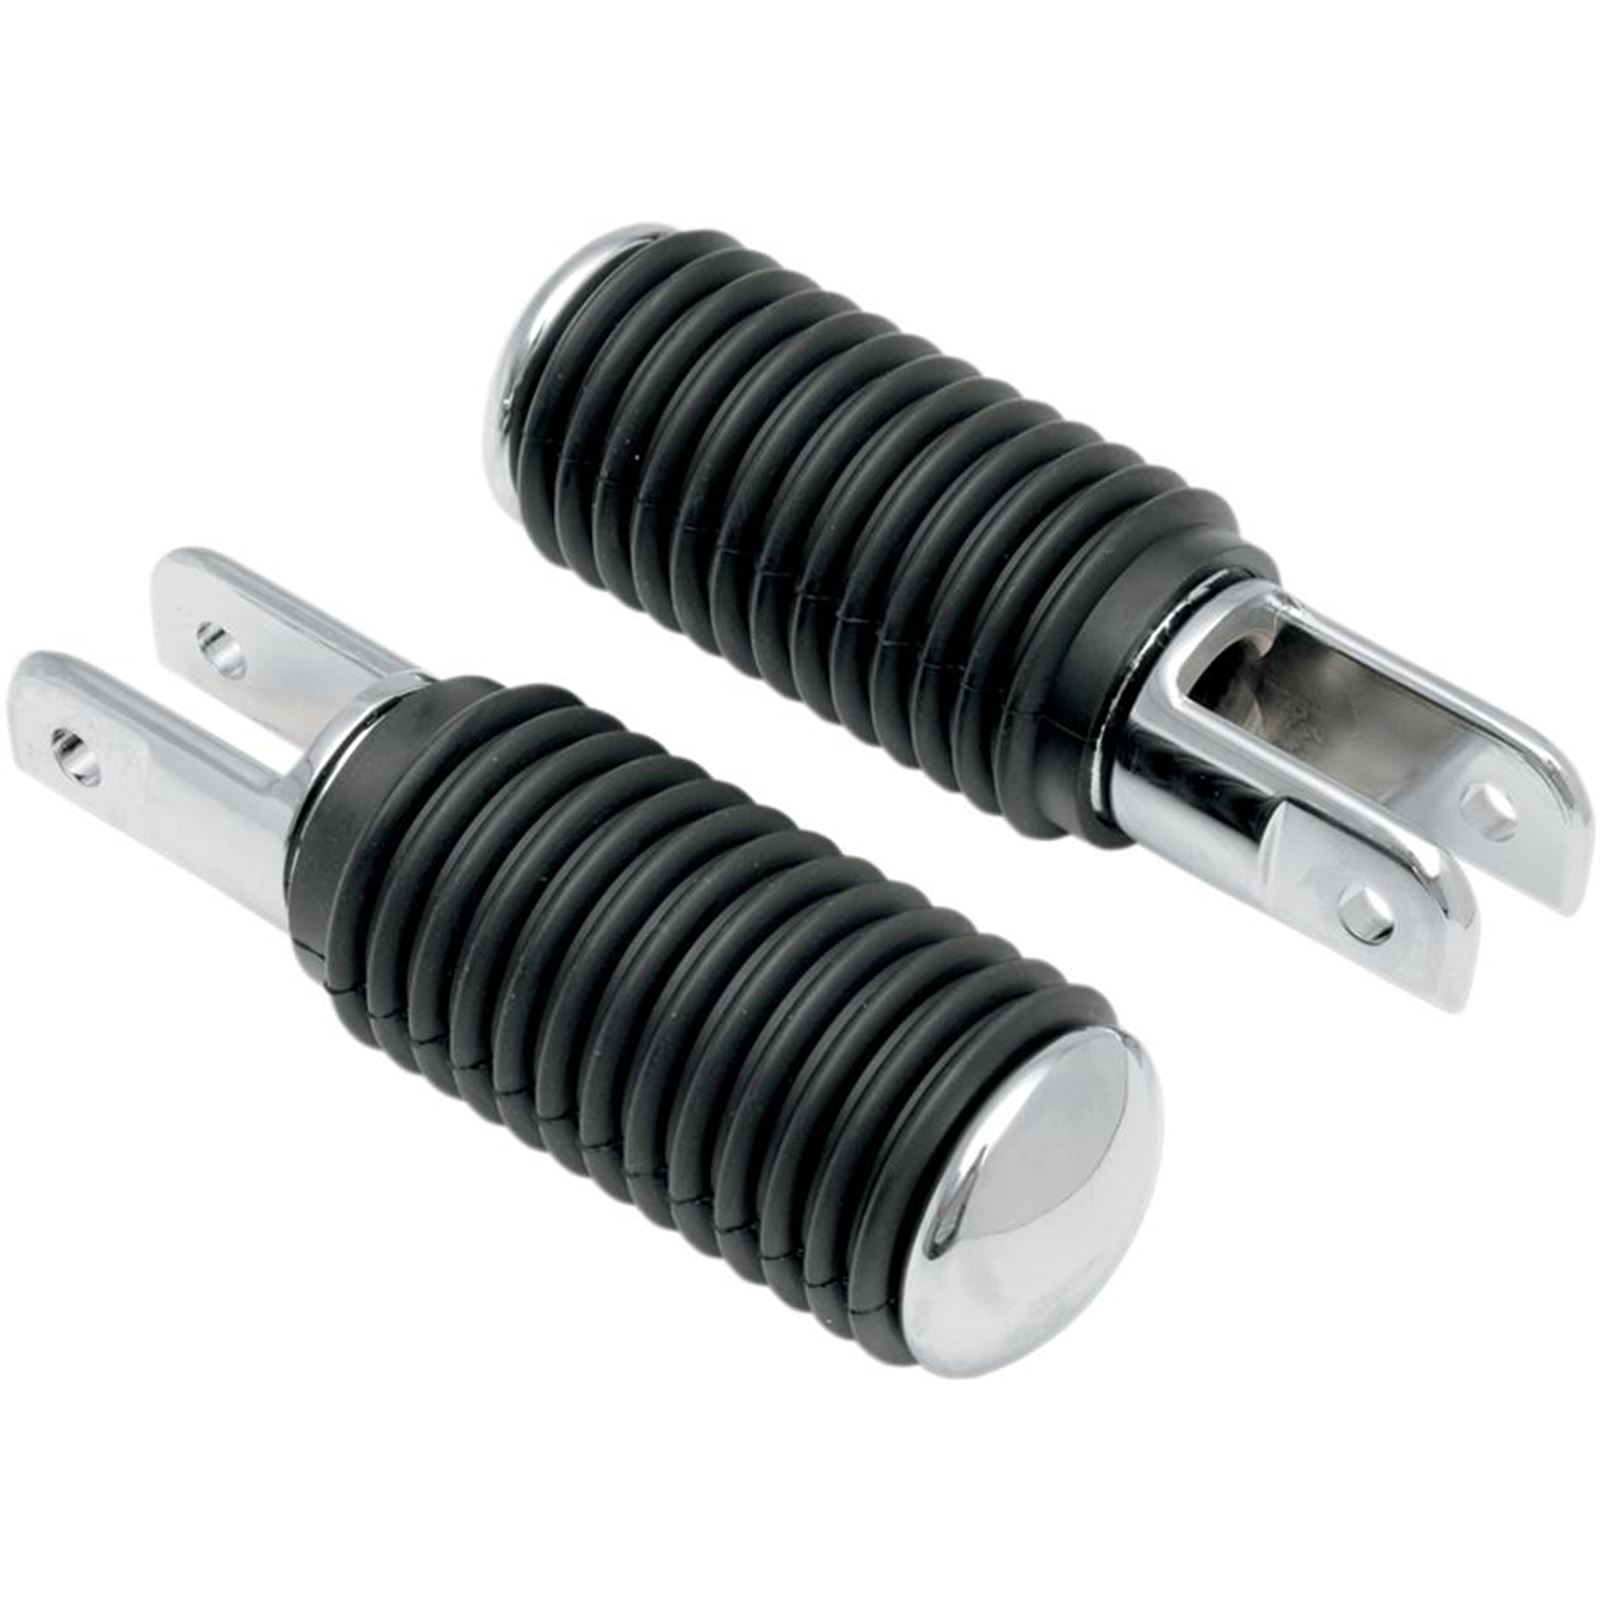 Drag Specialties 5/8 Mount Pegs - Rubber - Chrome End